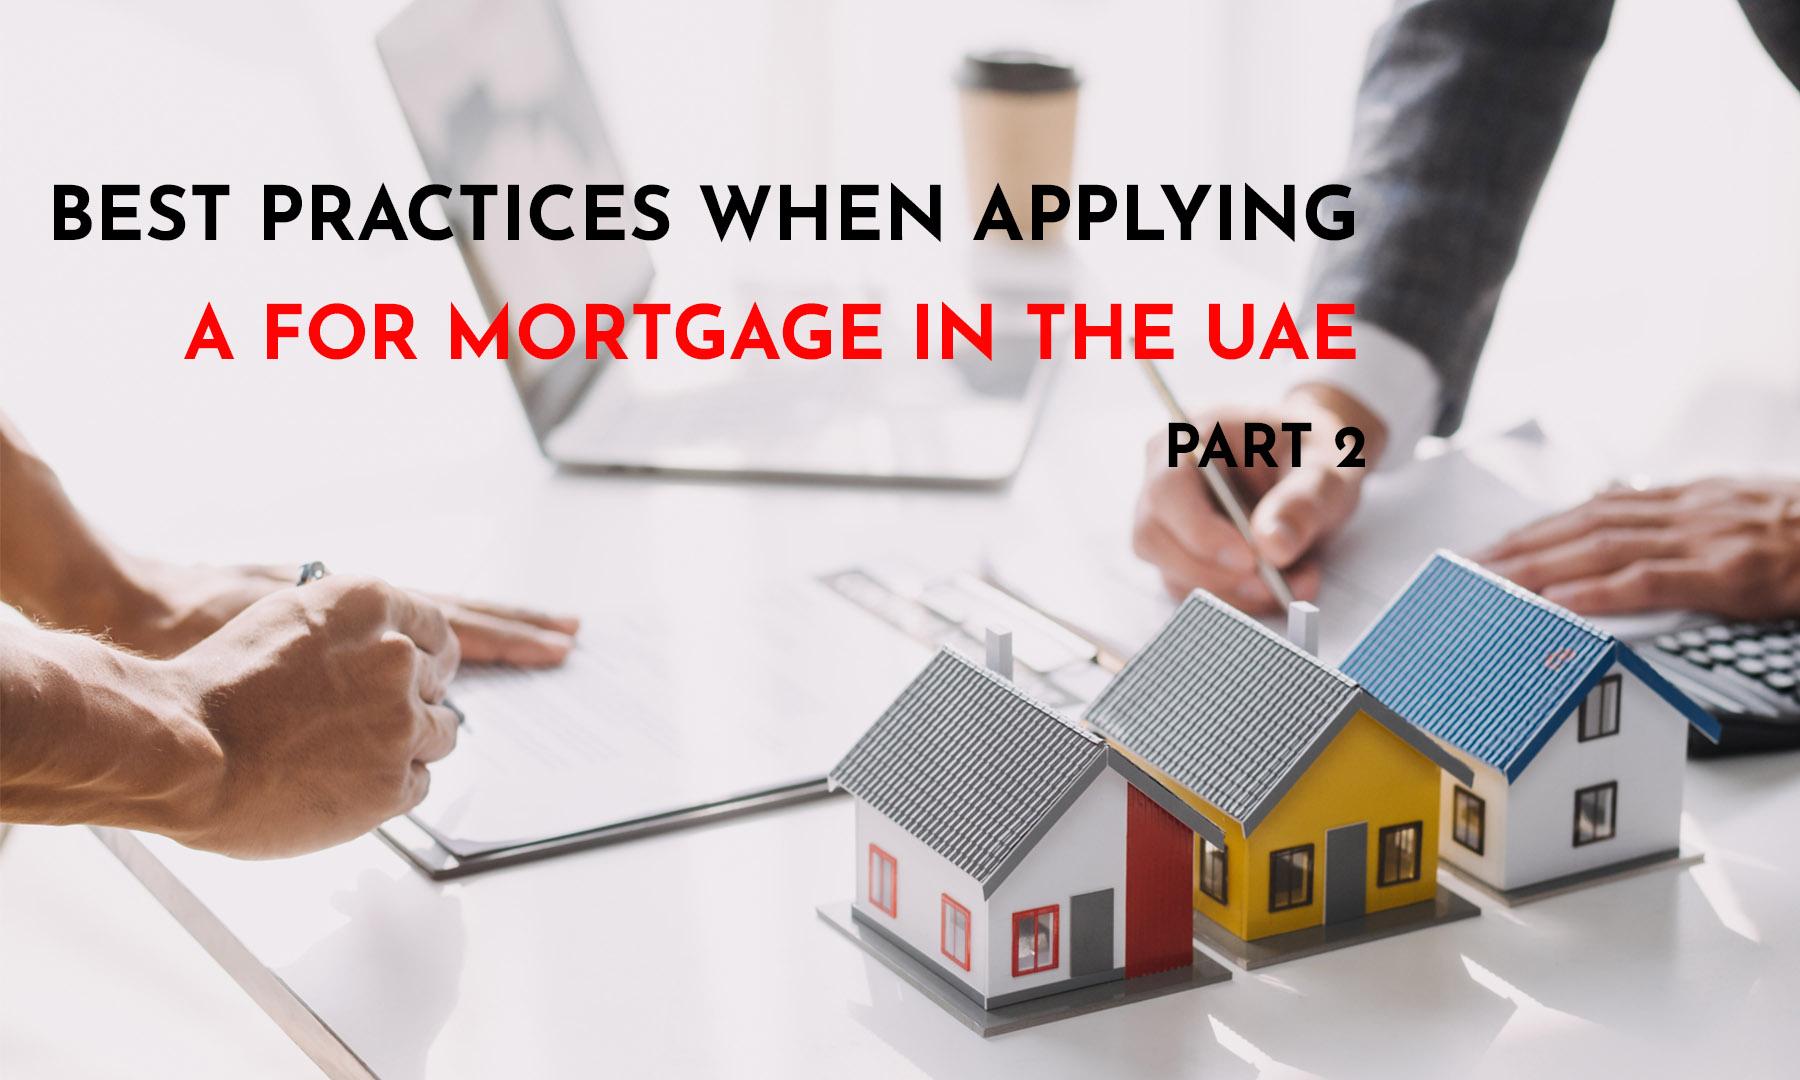 BEST PRACTICE WHEN APPLYING FOR A MORTGAGE IN UAE – PART 2